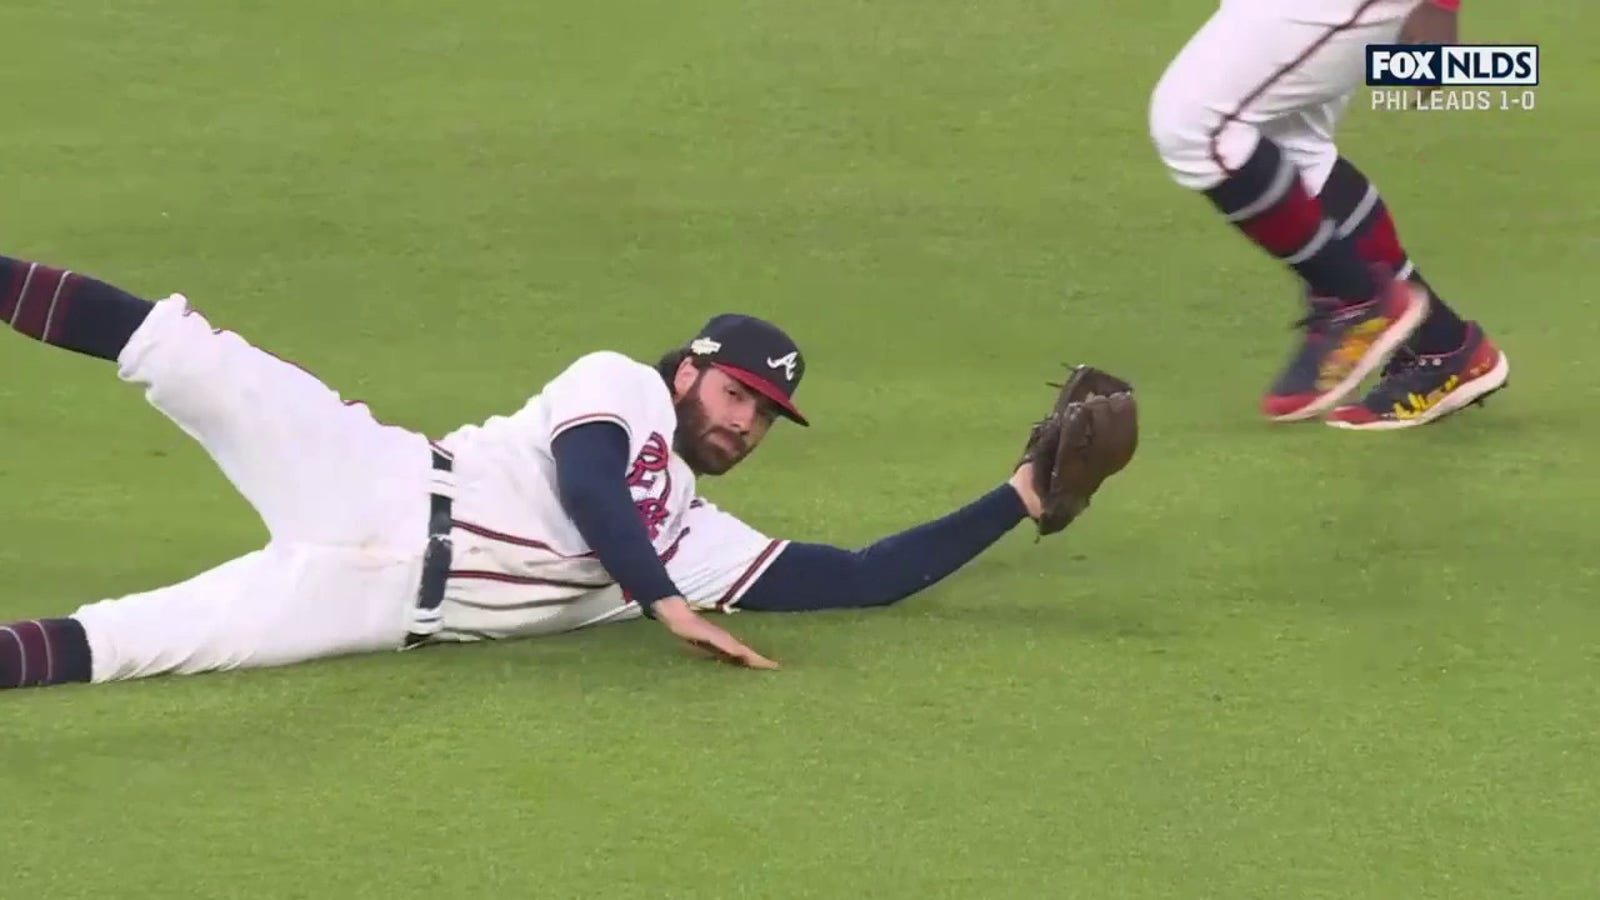 Dansby Swenson makes a diving catch against the Phillies